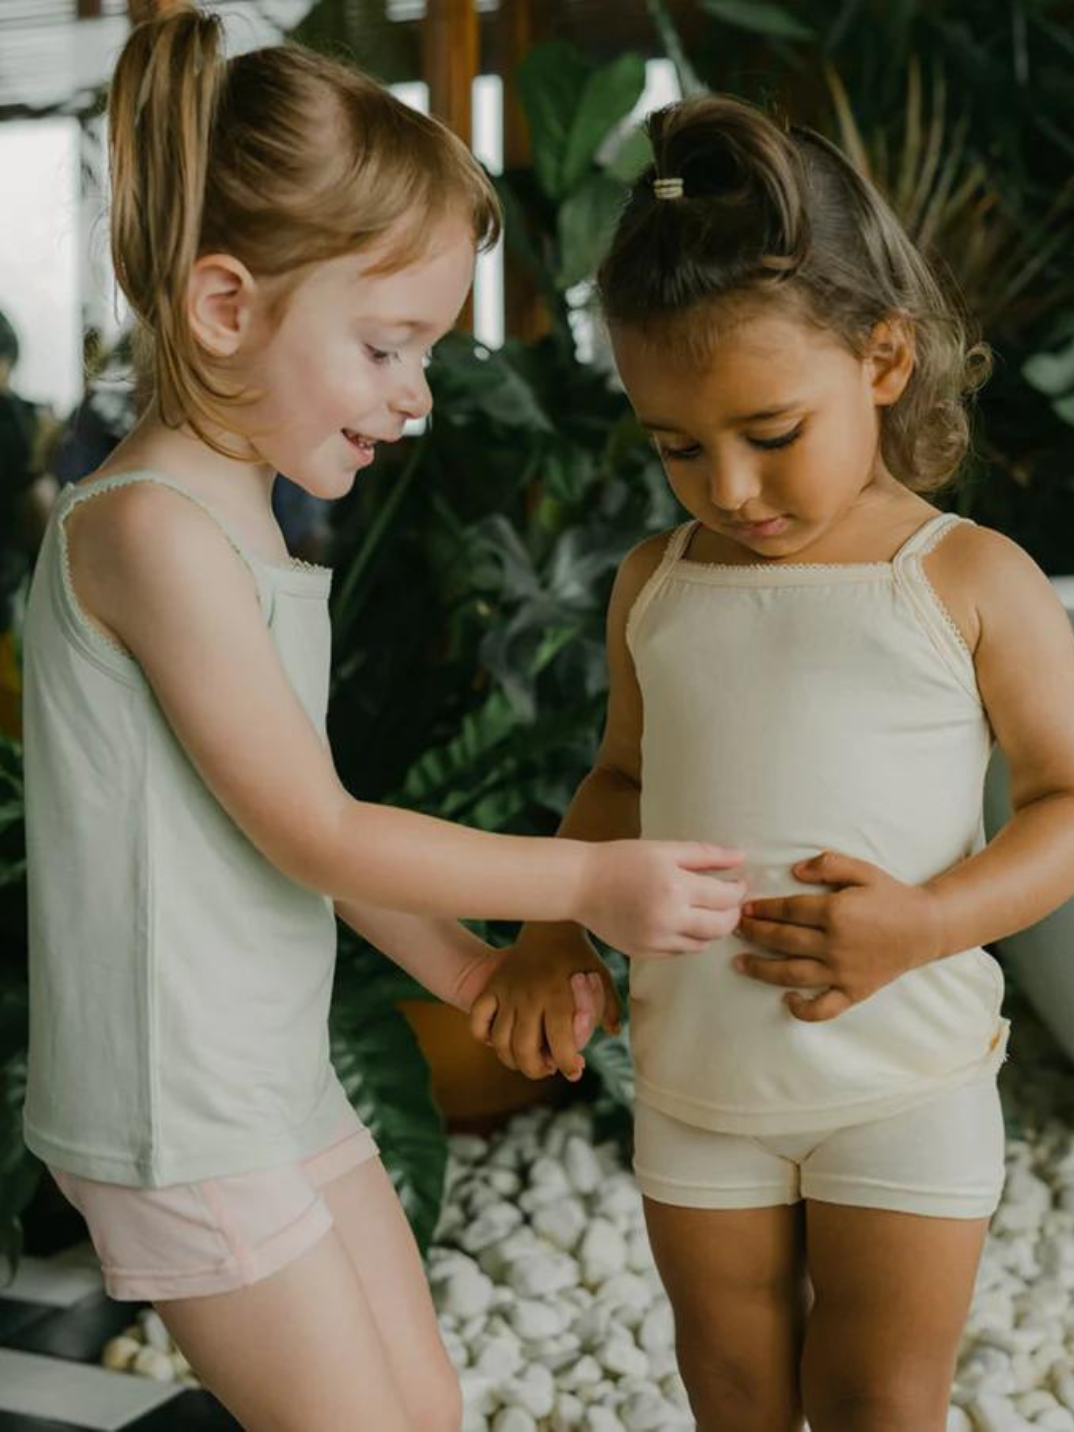 Just Peachy Camisoles are super soft and gentle on your little ones' skin. Designed with a snug fit for play, movement and a comfy night's rest. Add the breathable Camisole layer under your day clothes or snooze in maximum comfort. Made with Lenzing® TENCEL™ Micro Modal Fibers interwoven with Eco Soft Technology exclusively for Just Peachy. Green and cream kids super comfortable kids camis. Sustainable eco-friendly brand.